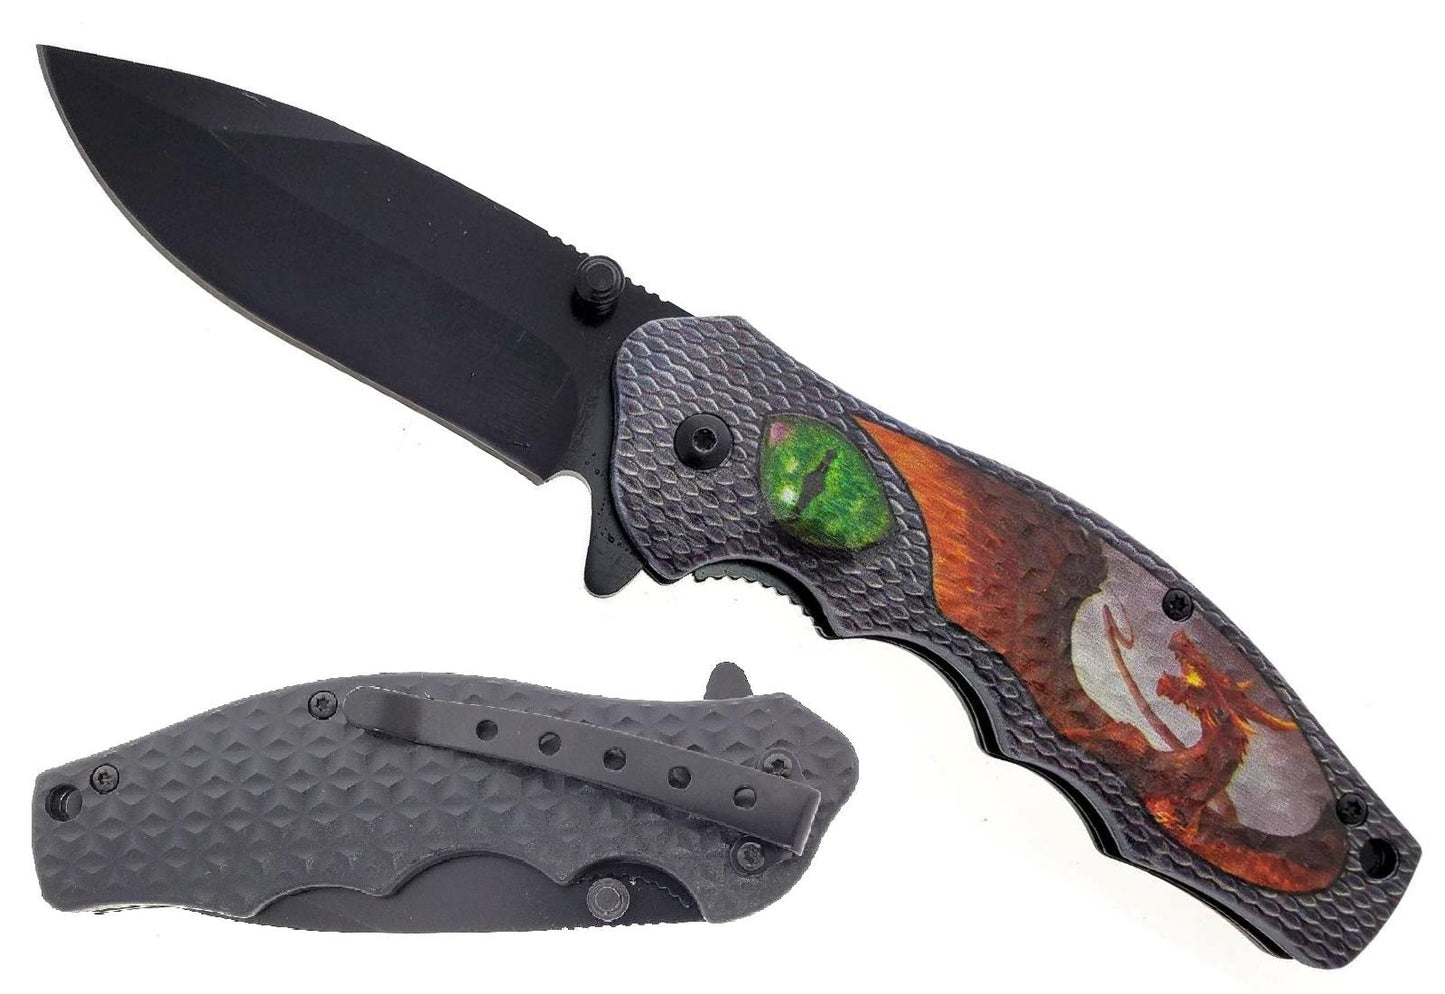 7.5" Spring Assisted Knife ABS Green Eye Dragon Design